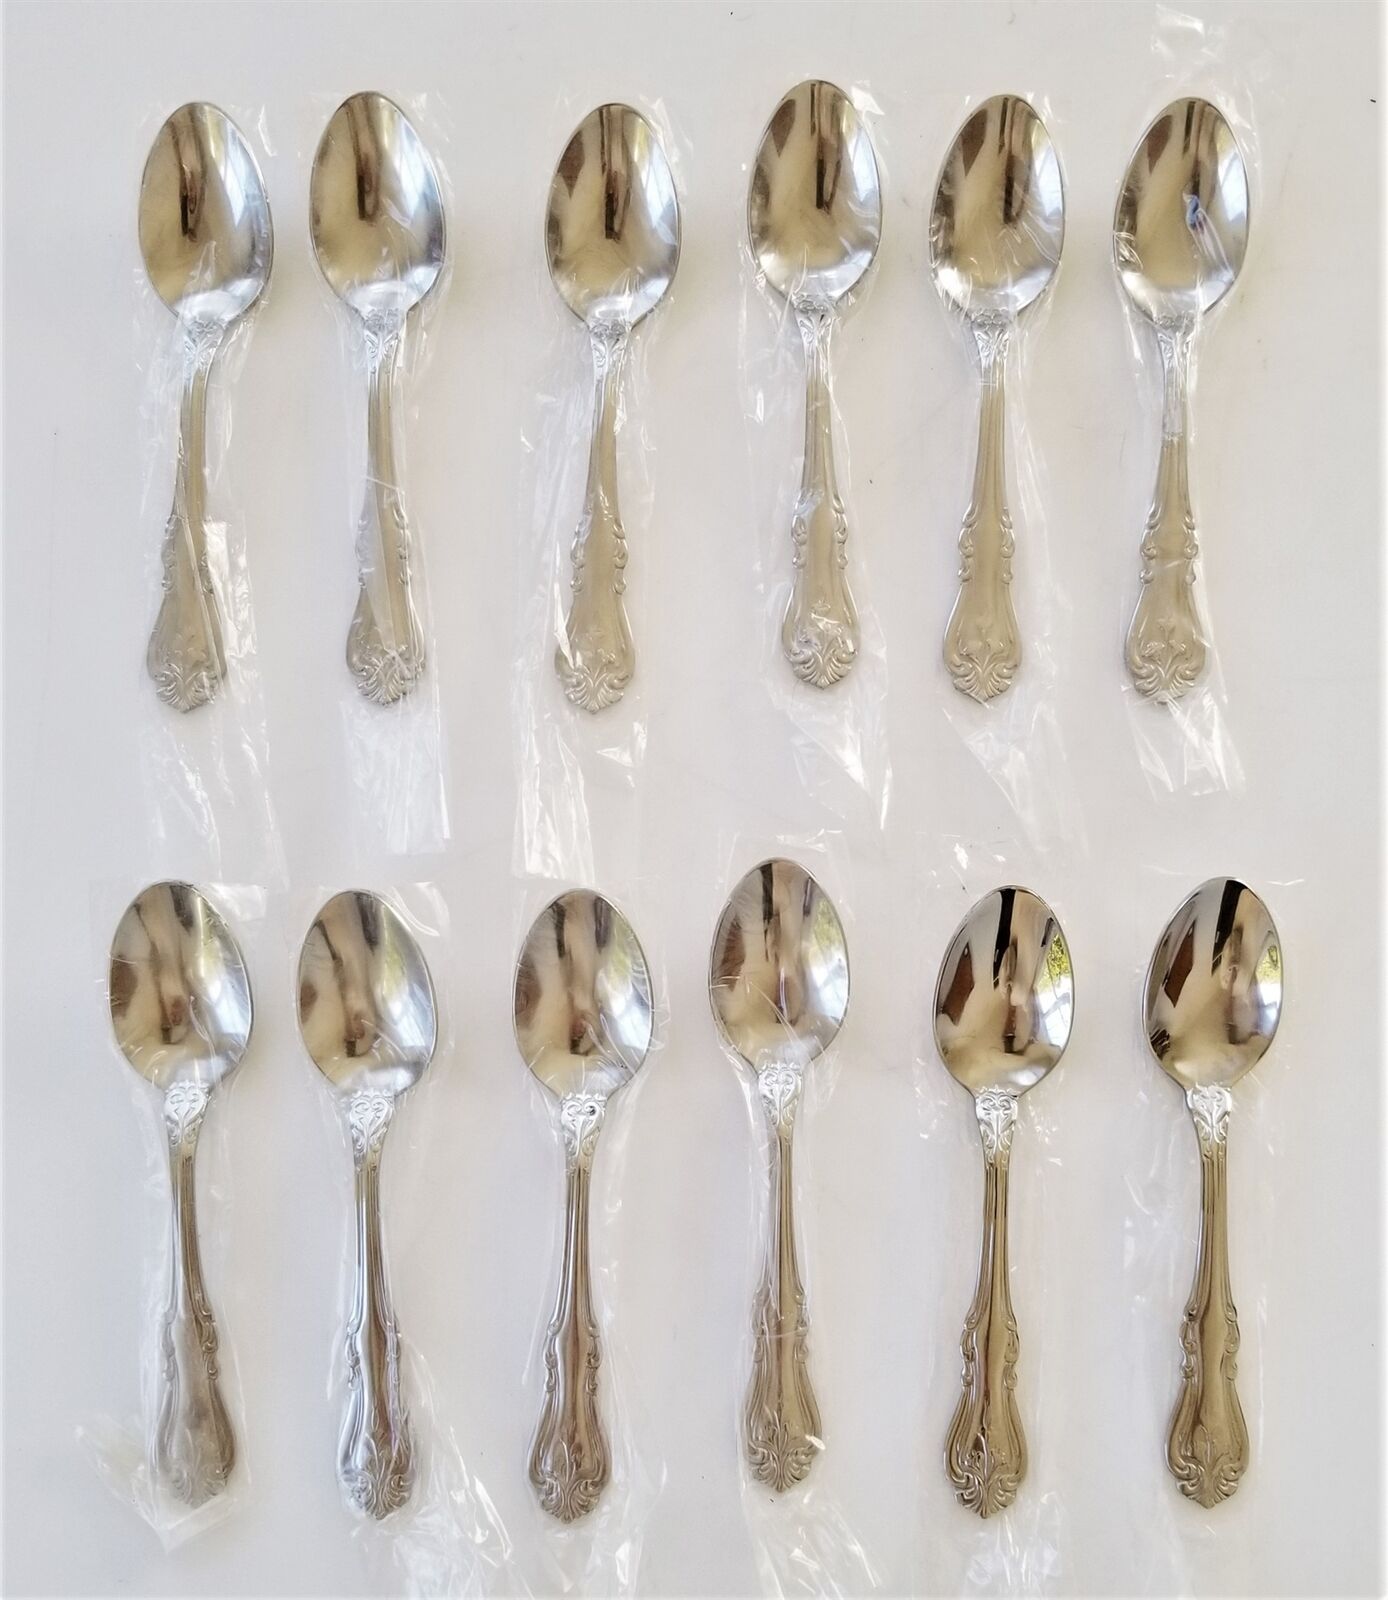 REED and BARTON RDS167 stainless FLATWARE 12pc TEA DESSERT SPOONS likely unused